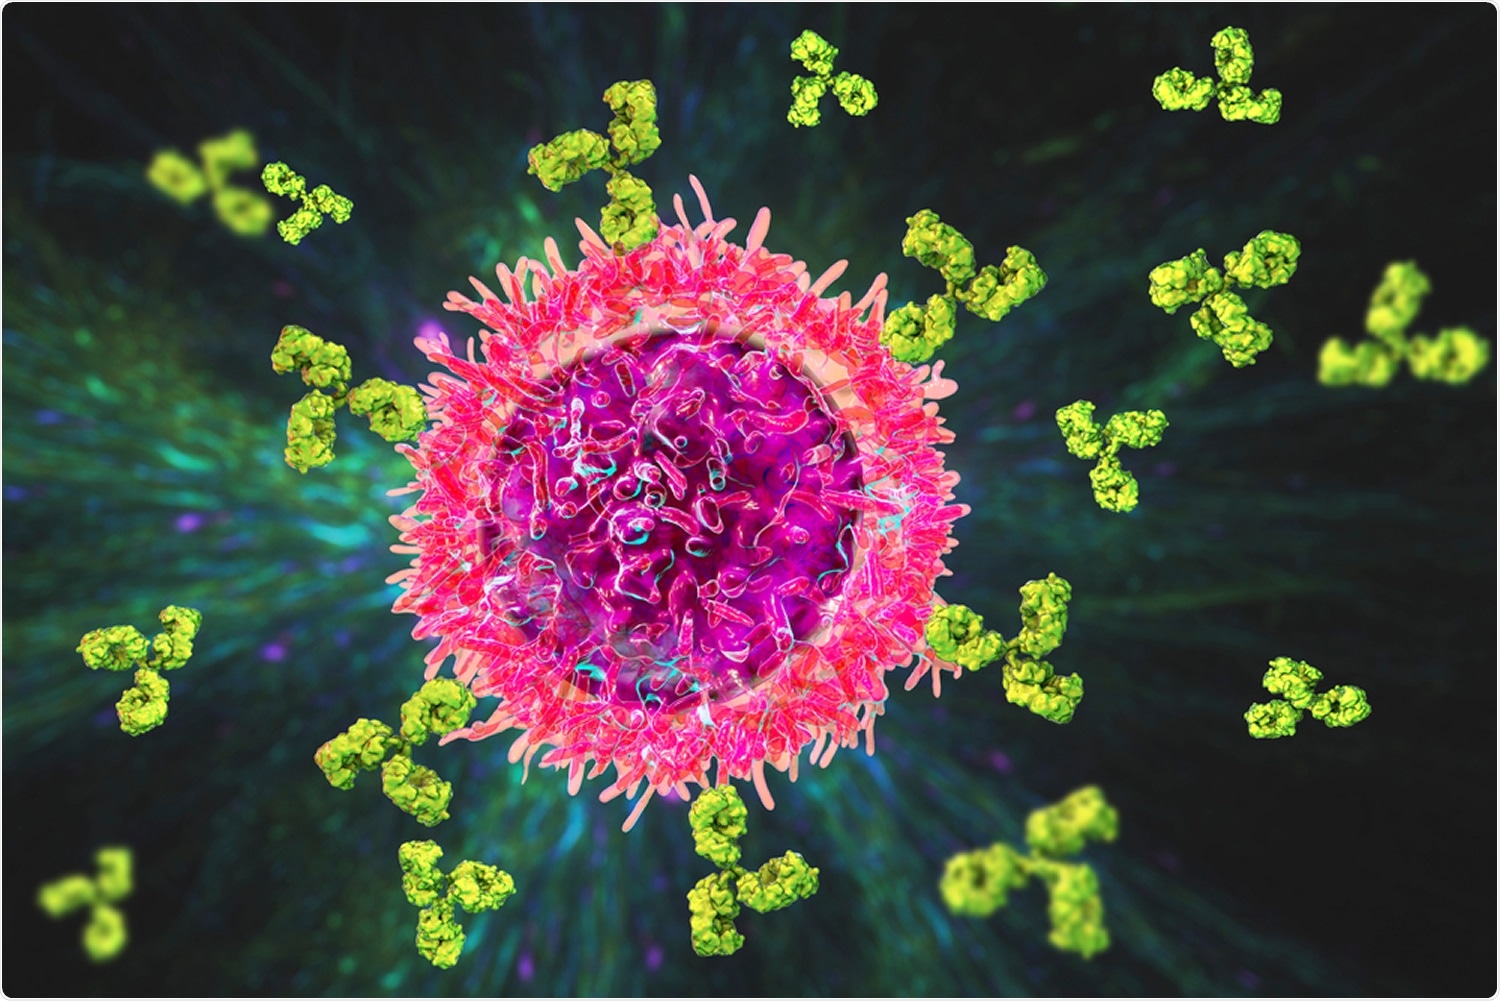 Study: Humoral and cellular responses to mRNA vaccines against SARS-CoV2 in patients with a history of CD20-B-cell depleting therapy. Image Credit: Kateryna Kon / Shutterstock